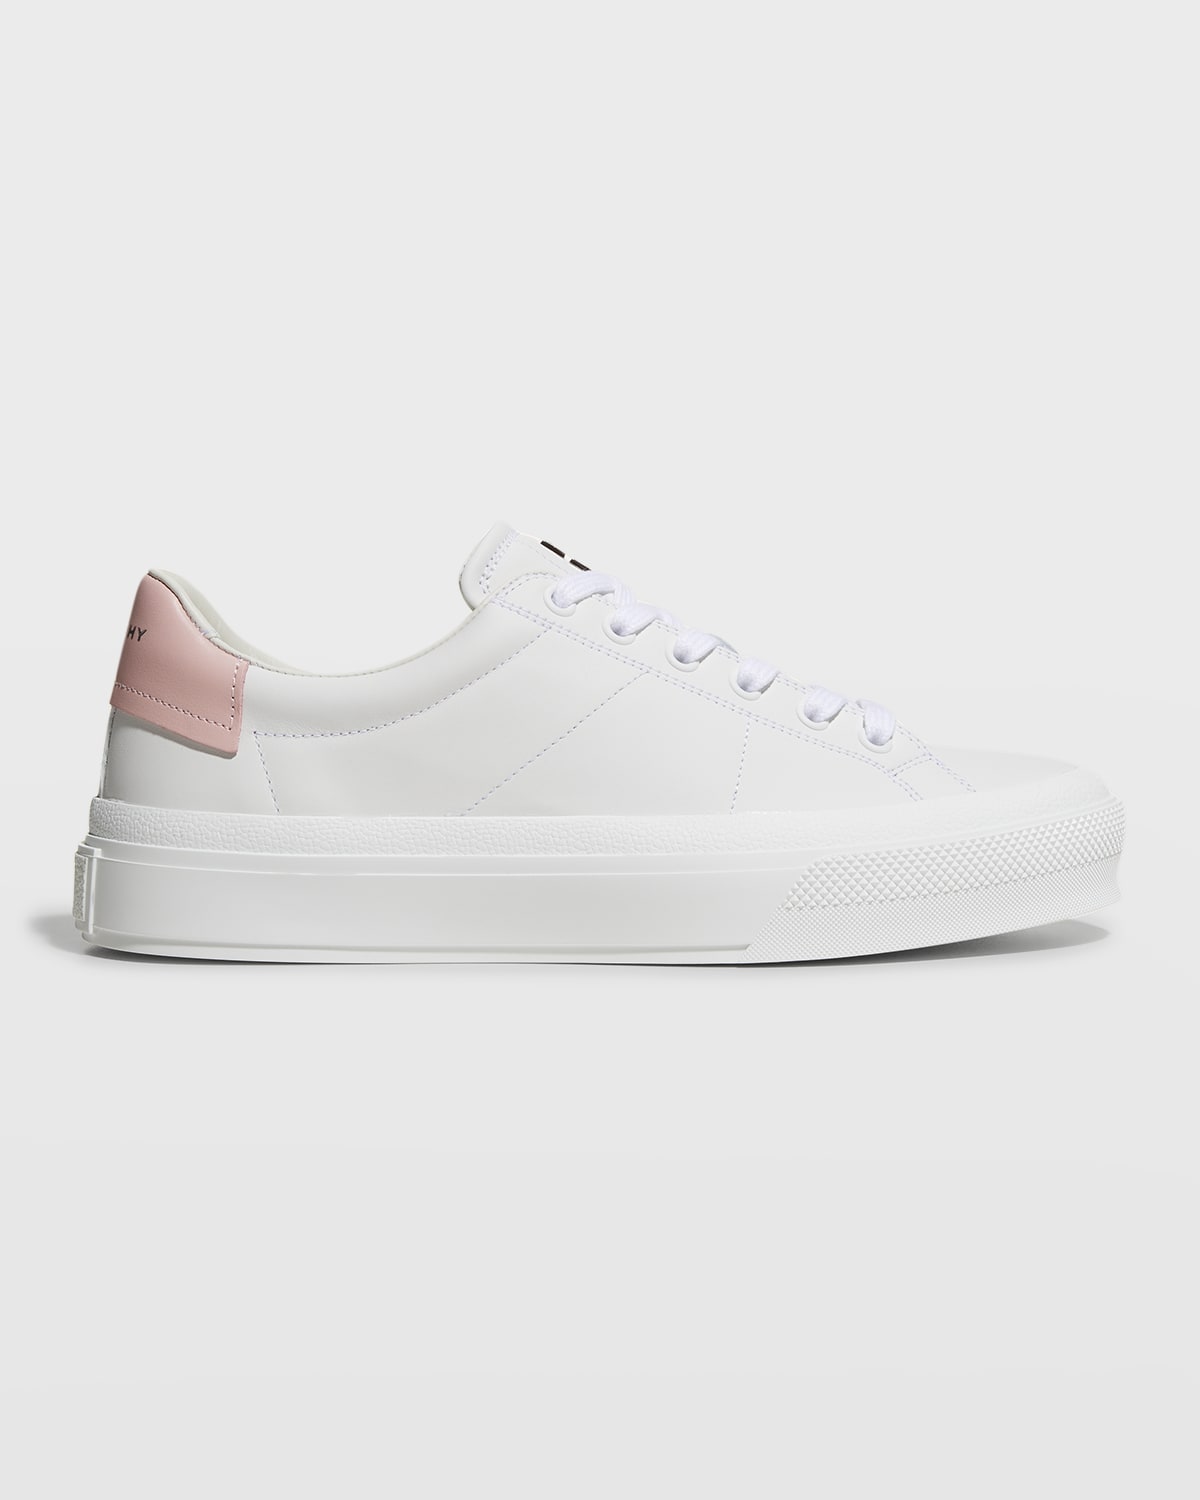 Givenchy City Sport Bicolor Low-Top Sneakers